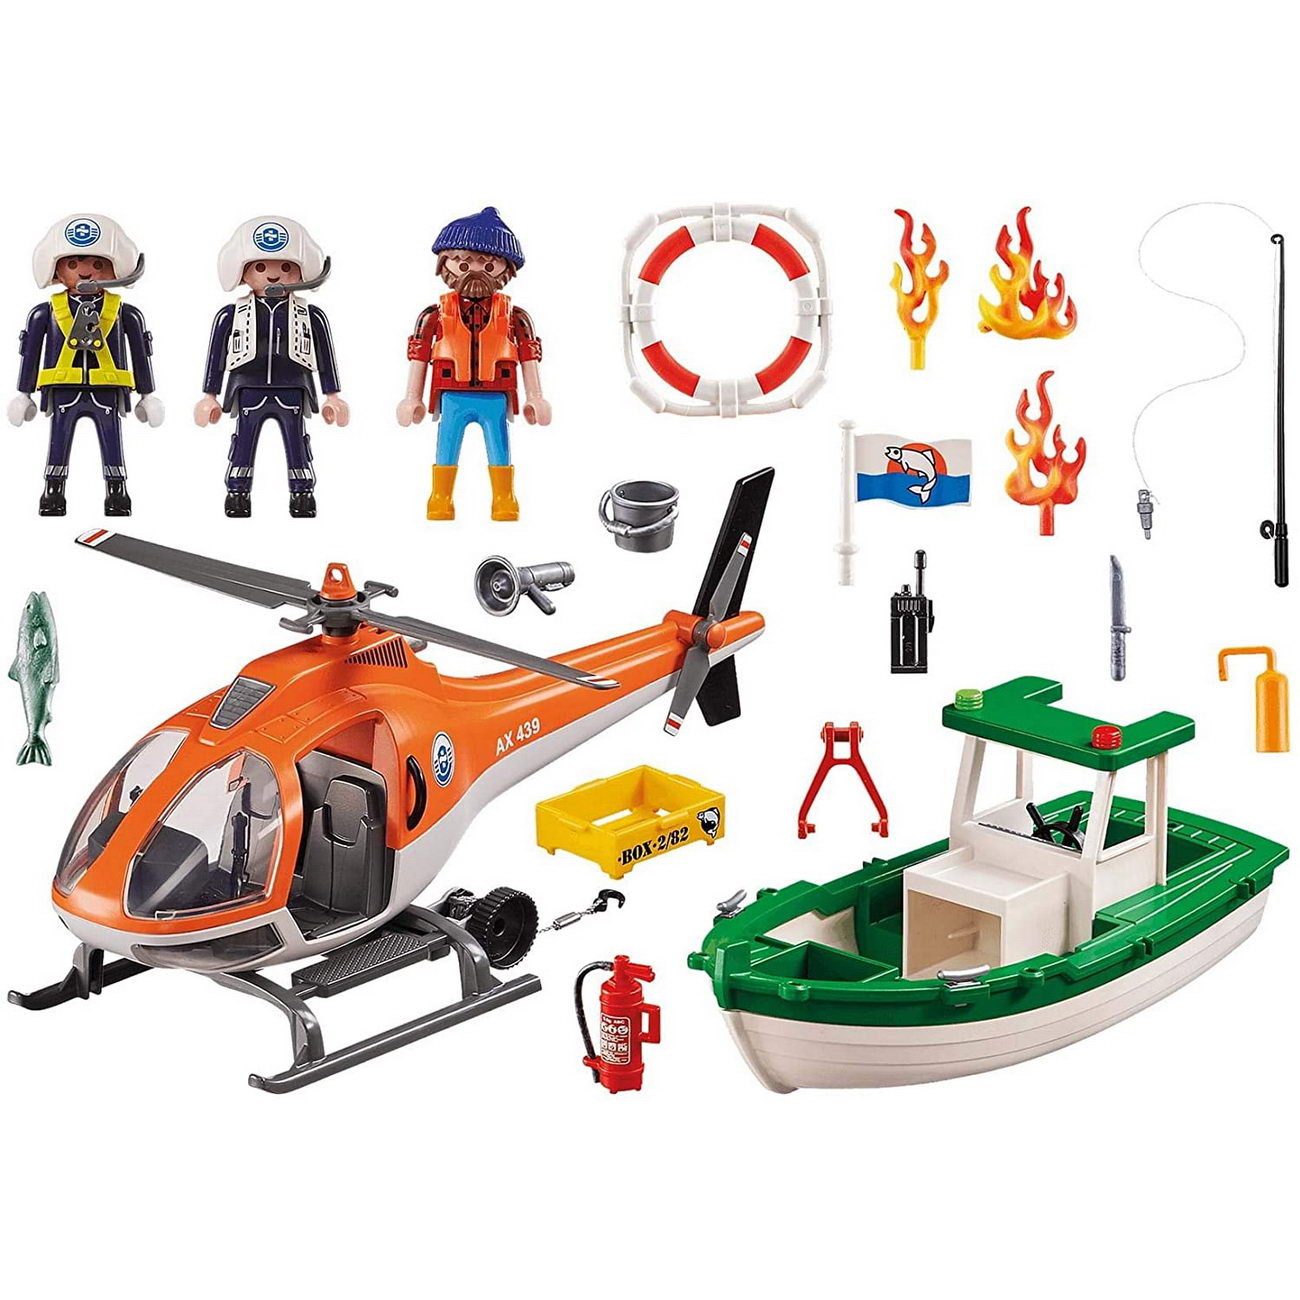 Playmobil 70491 - Coastal Fire Mission - Rescue Action